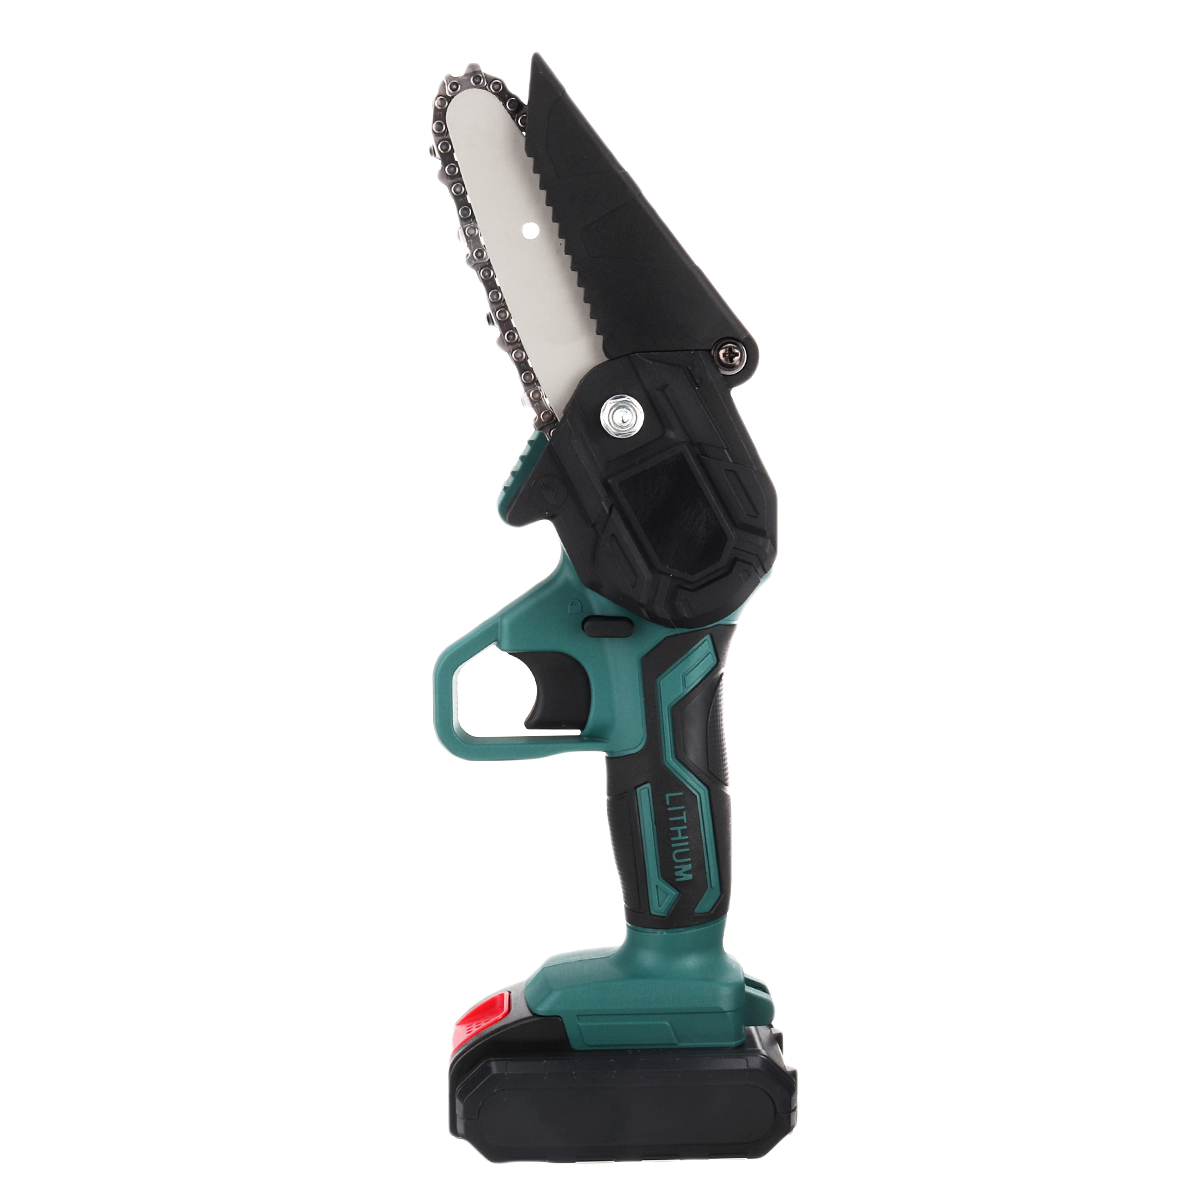 4-Inch-Cordless-Electric-Pruning-Saw-Rechargeable-One-handed-Woodworking-Tool-Mini-Chain-Saw-For-Woo-1850641-5